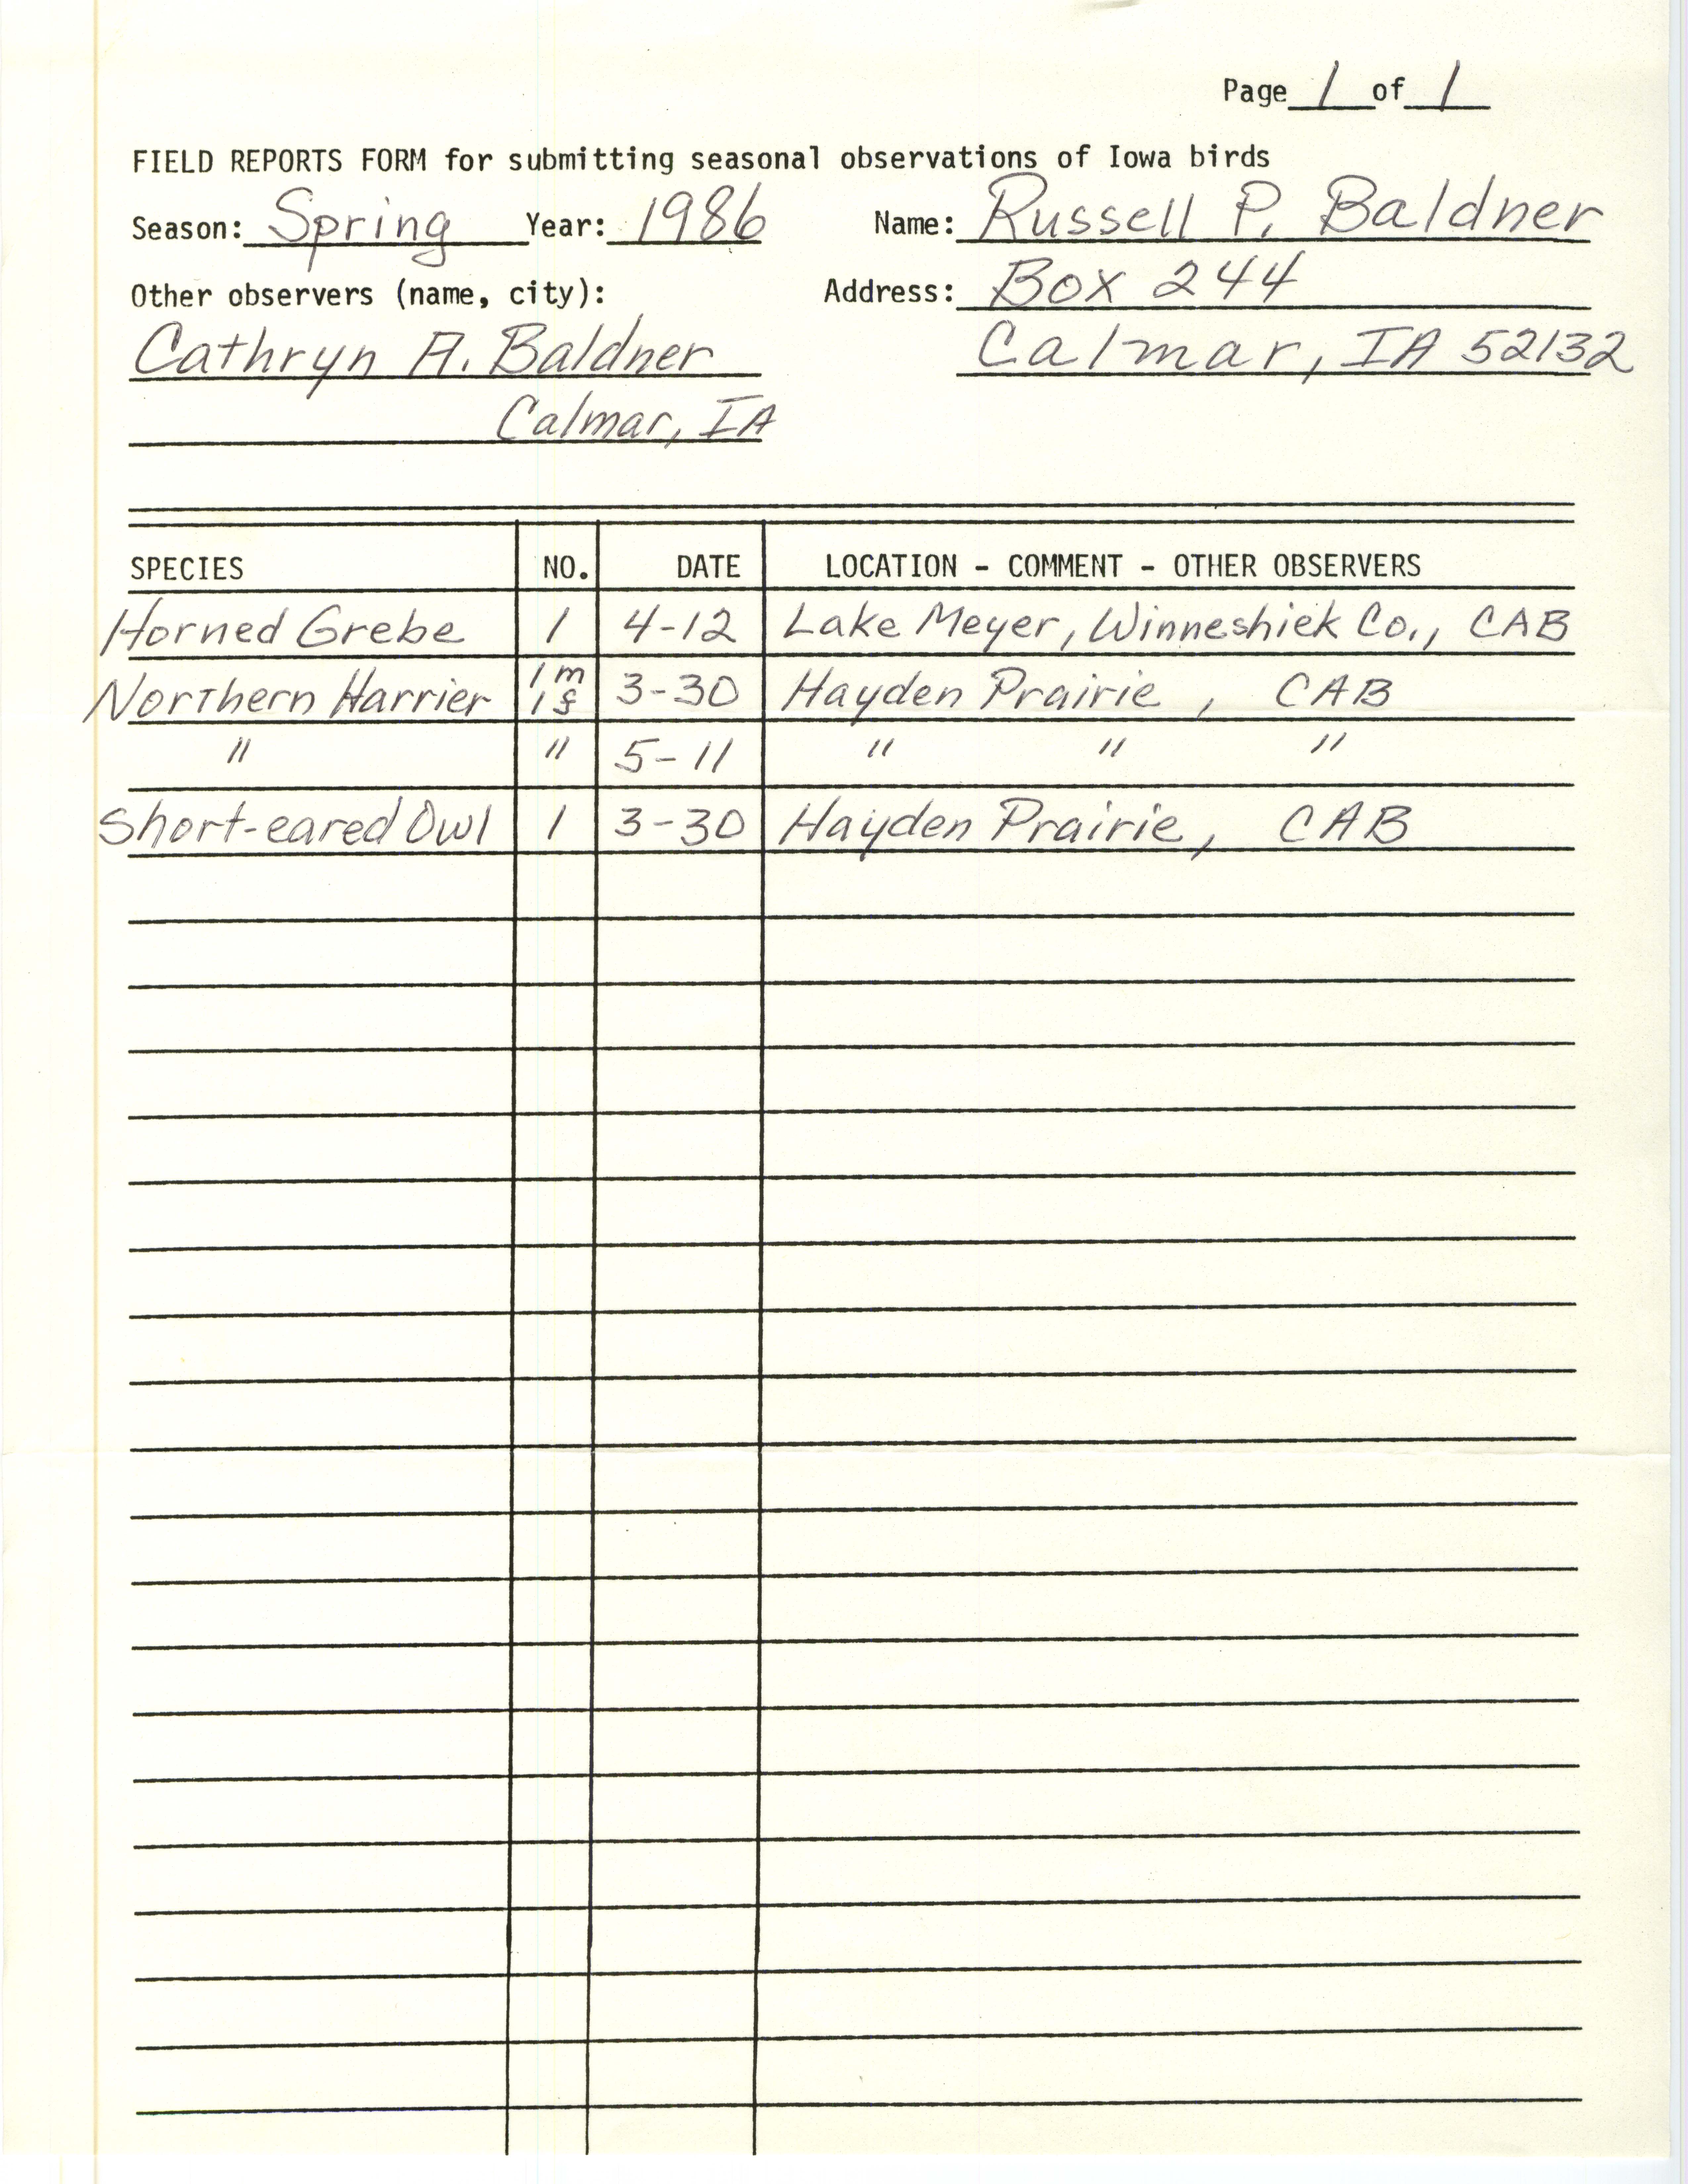 Field reports form for submitting seasonal observations of Iowa birds, Russell Baldner, Spring 1986